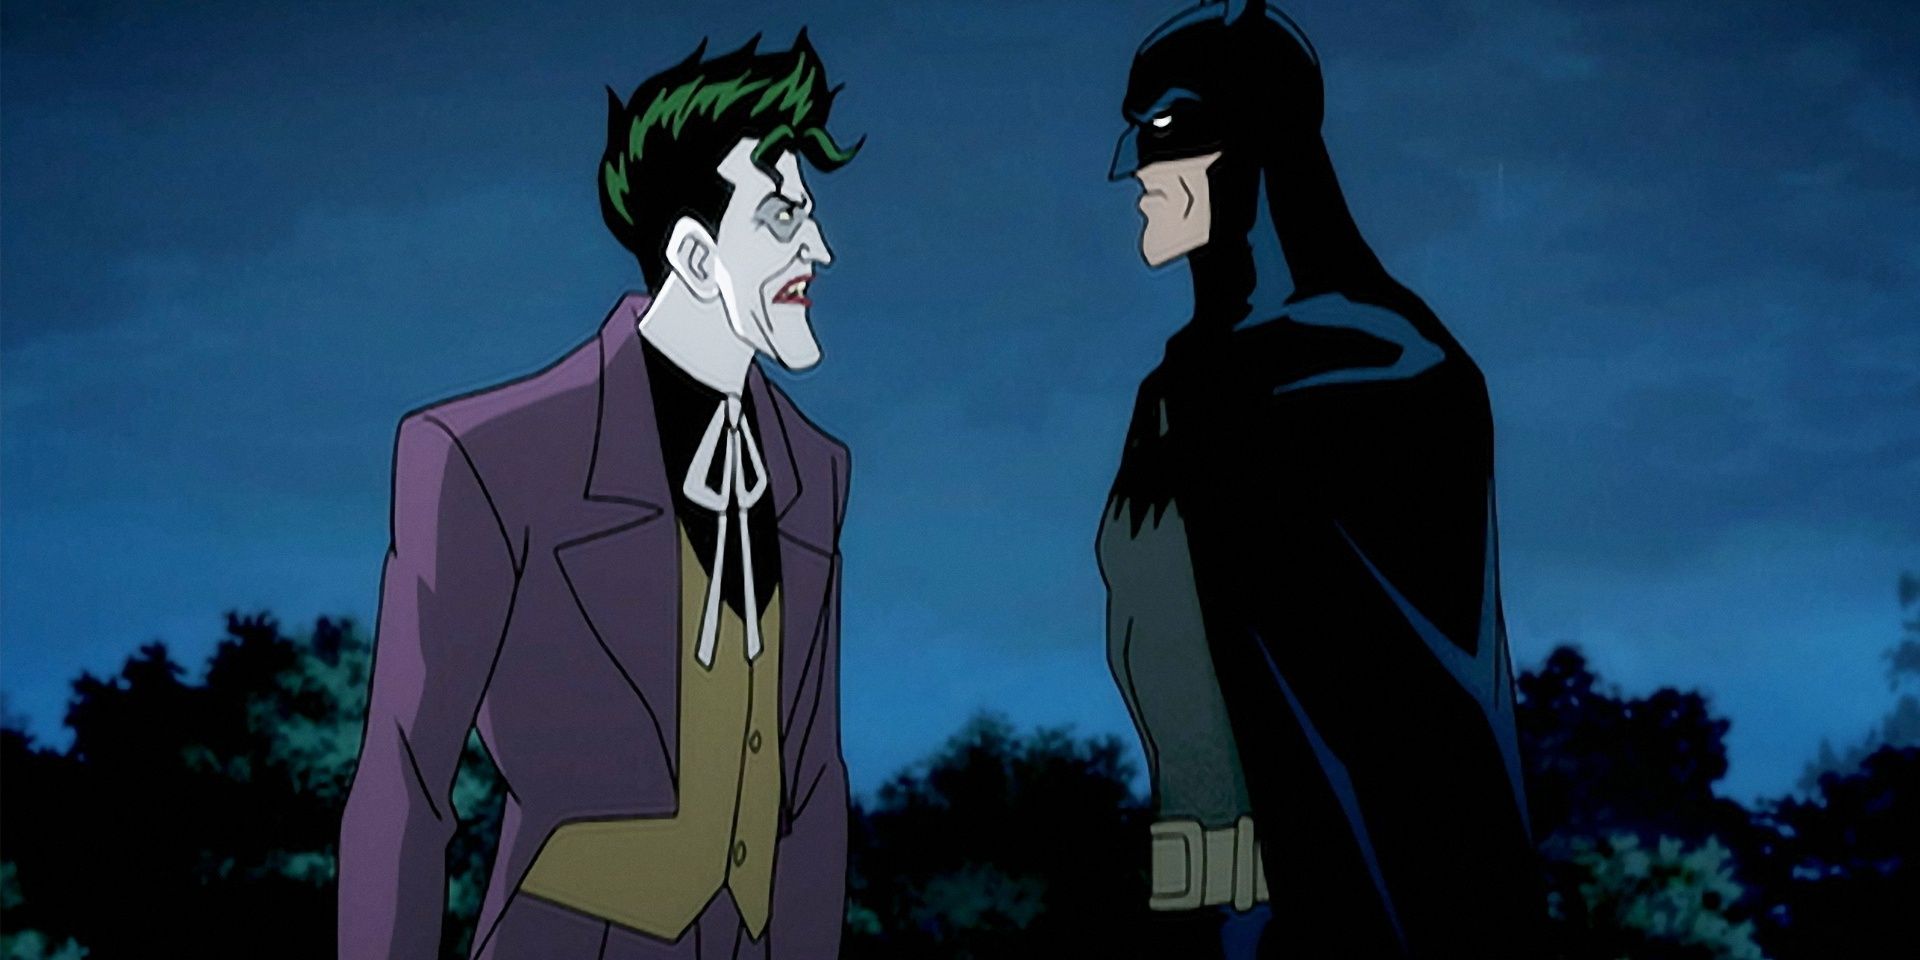 Batman and the Joker face to face